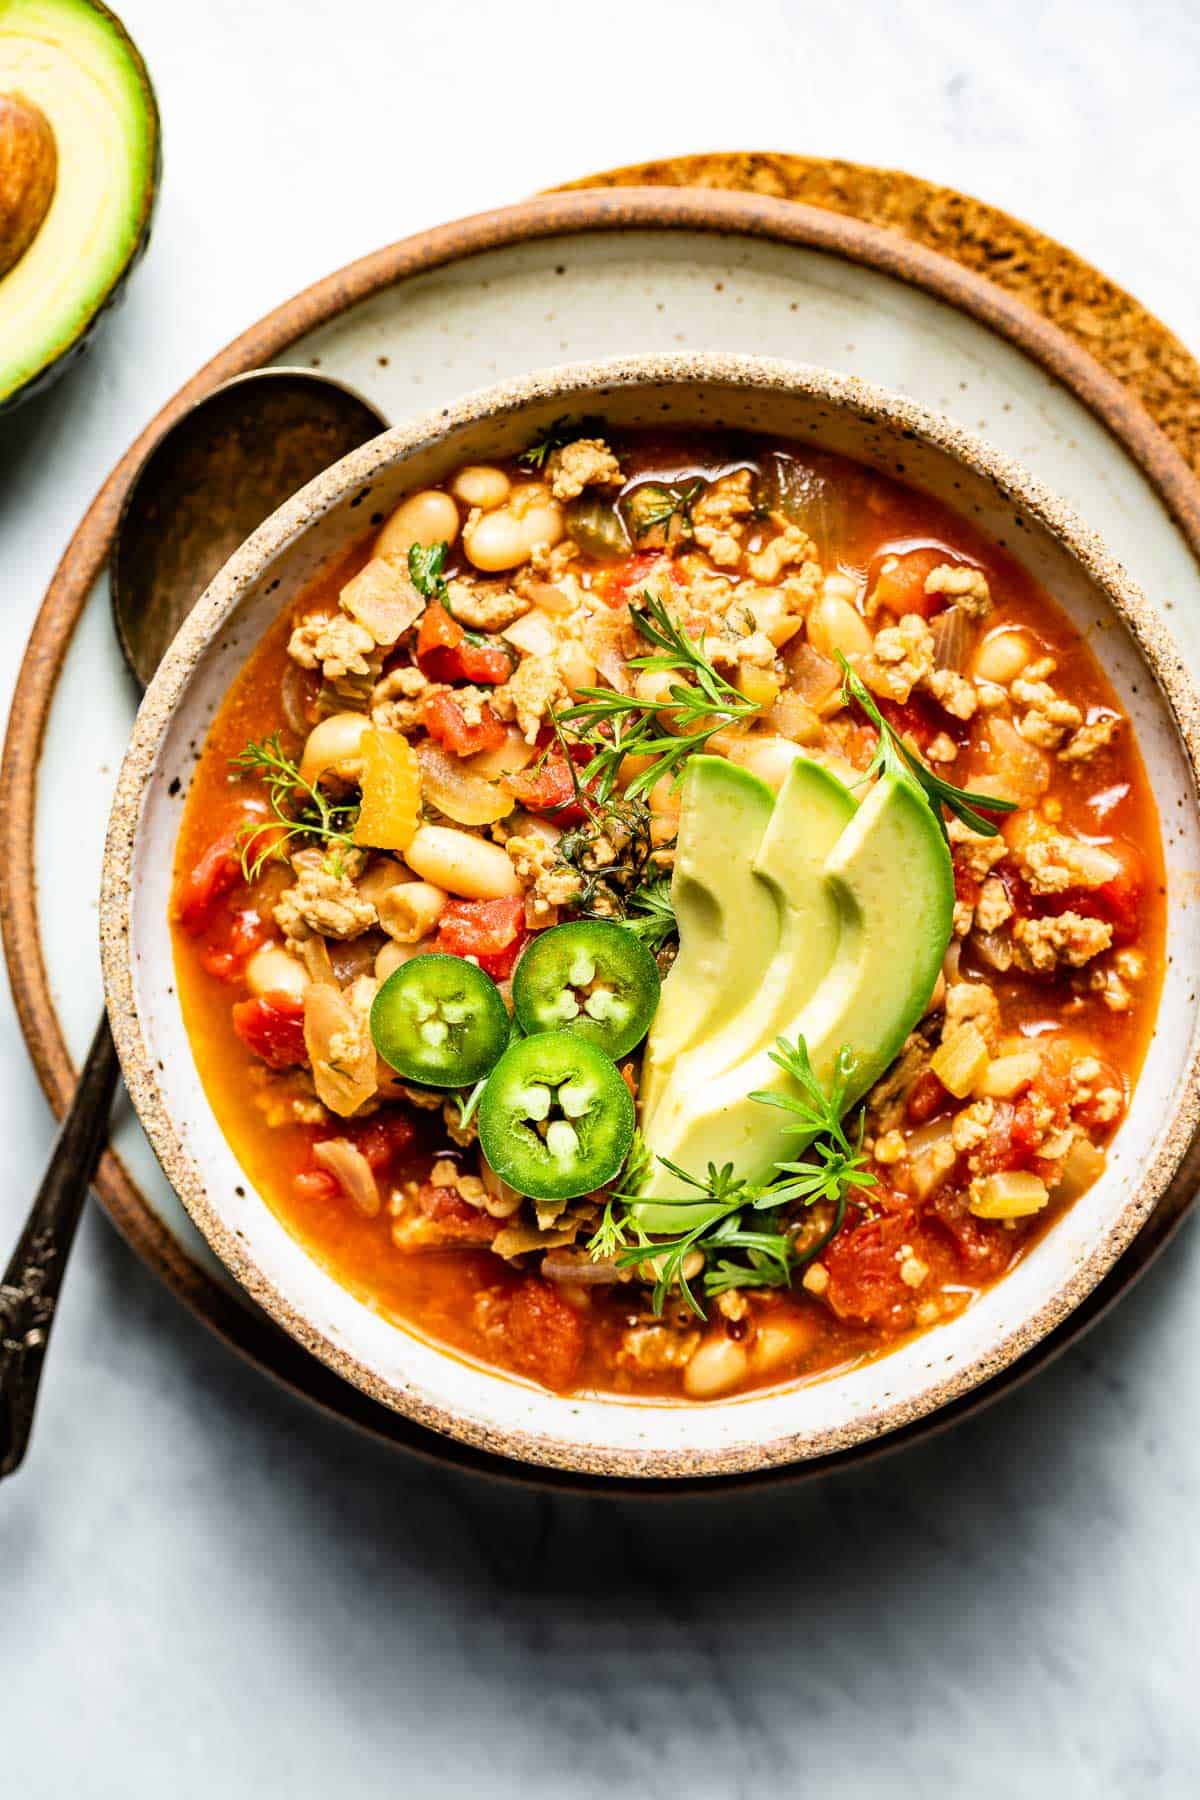 White bean buffalo sauce chili in a bowl garnished with jalapenos and avocado slices.